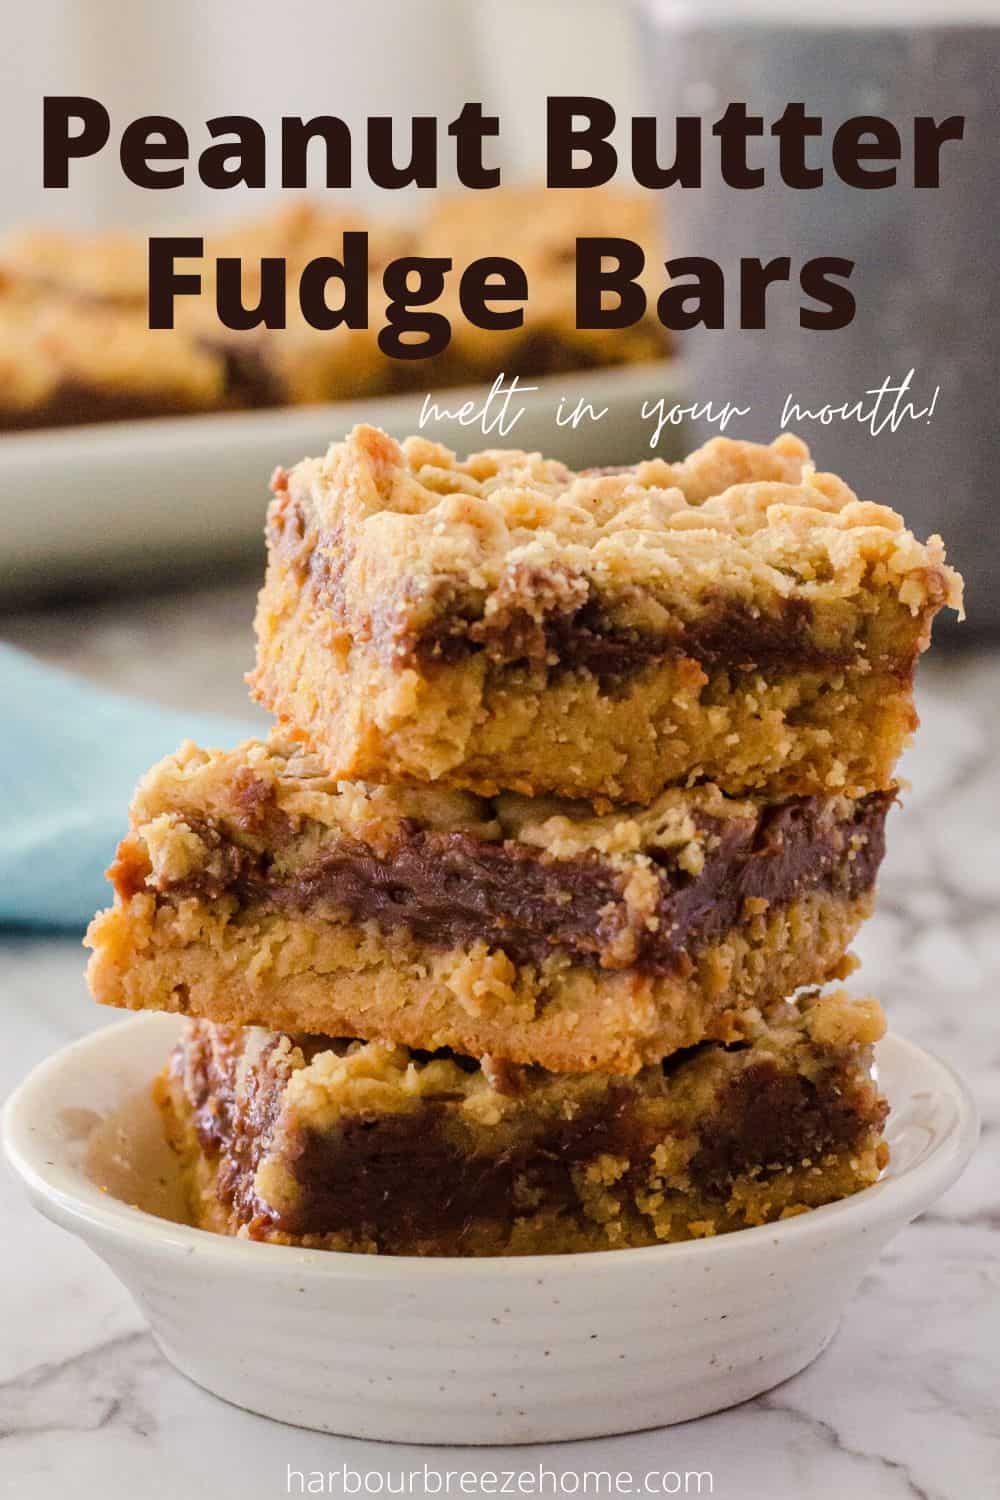 Peanut Butter Chocolate Bars with Cake Mix | Harbour Breeze Home